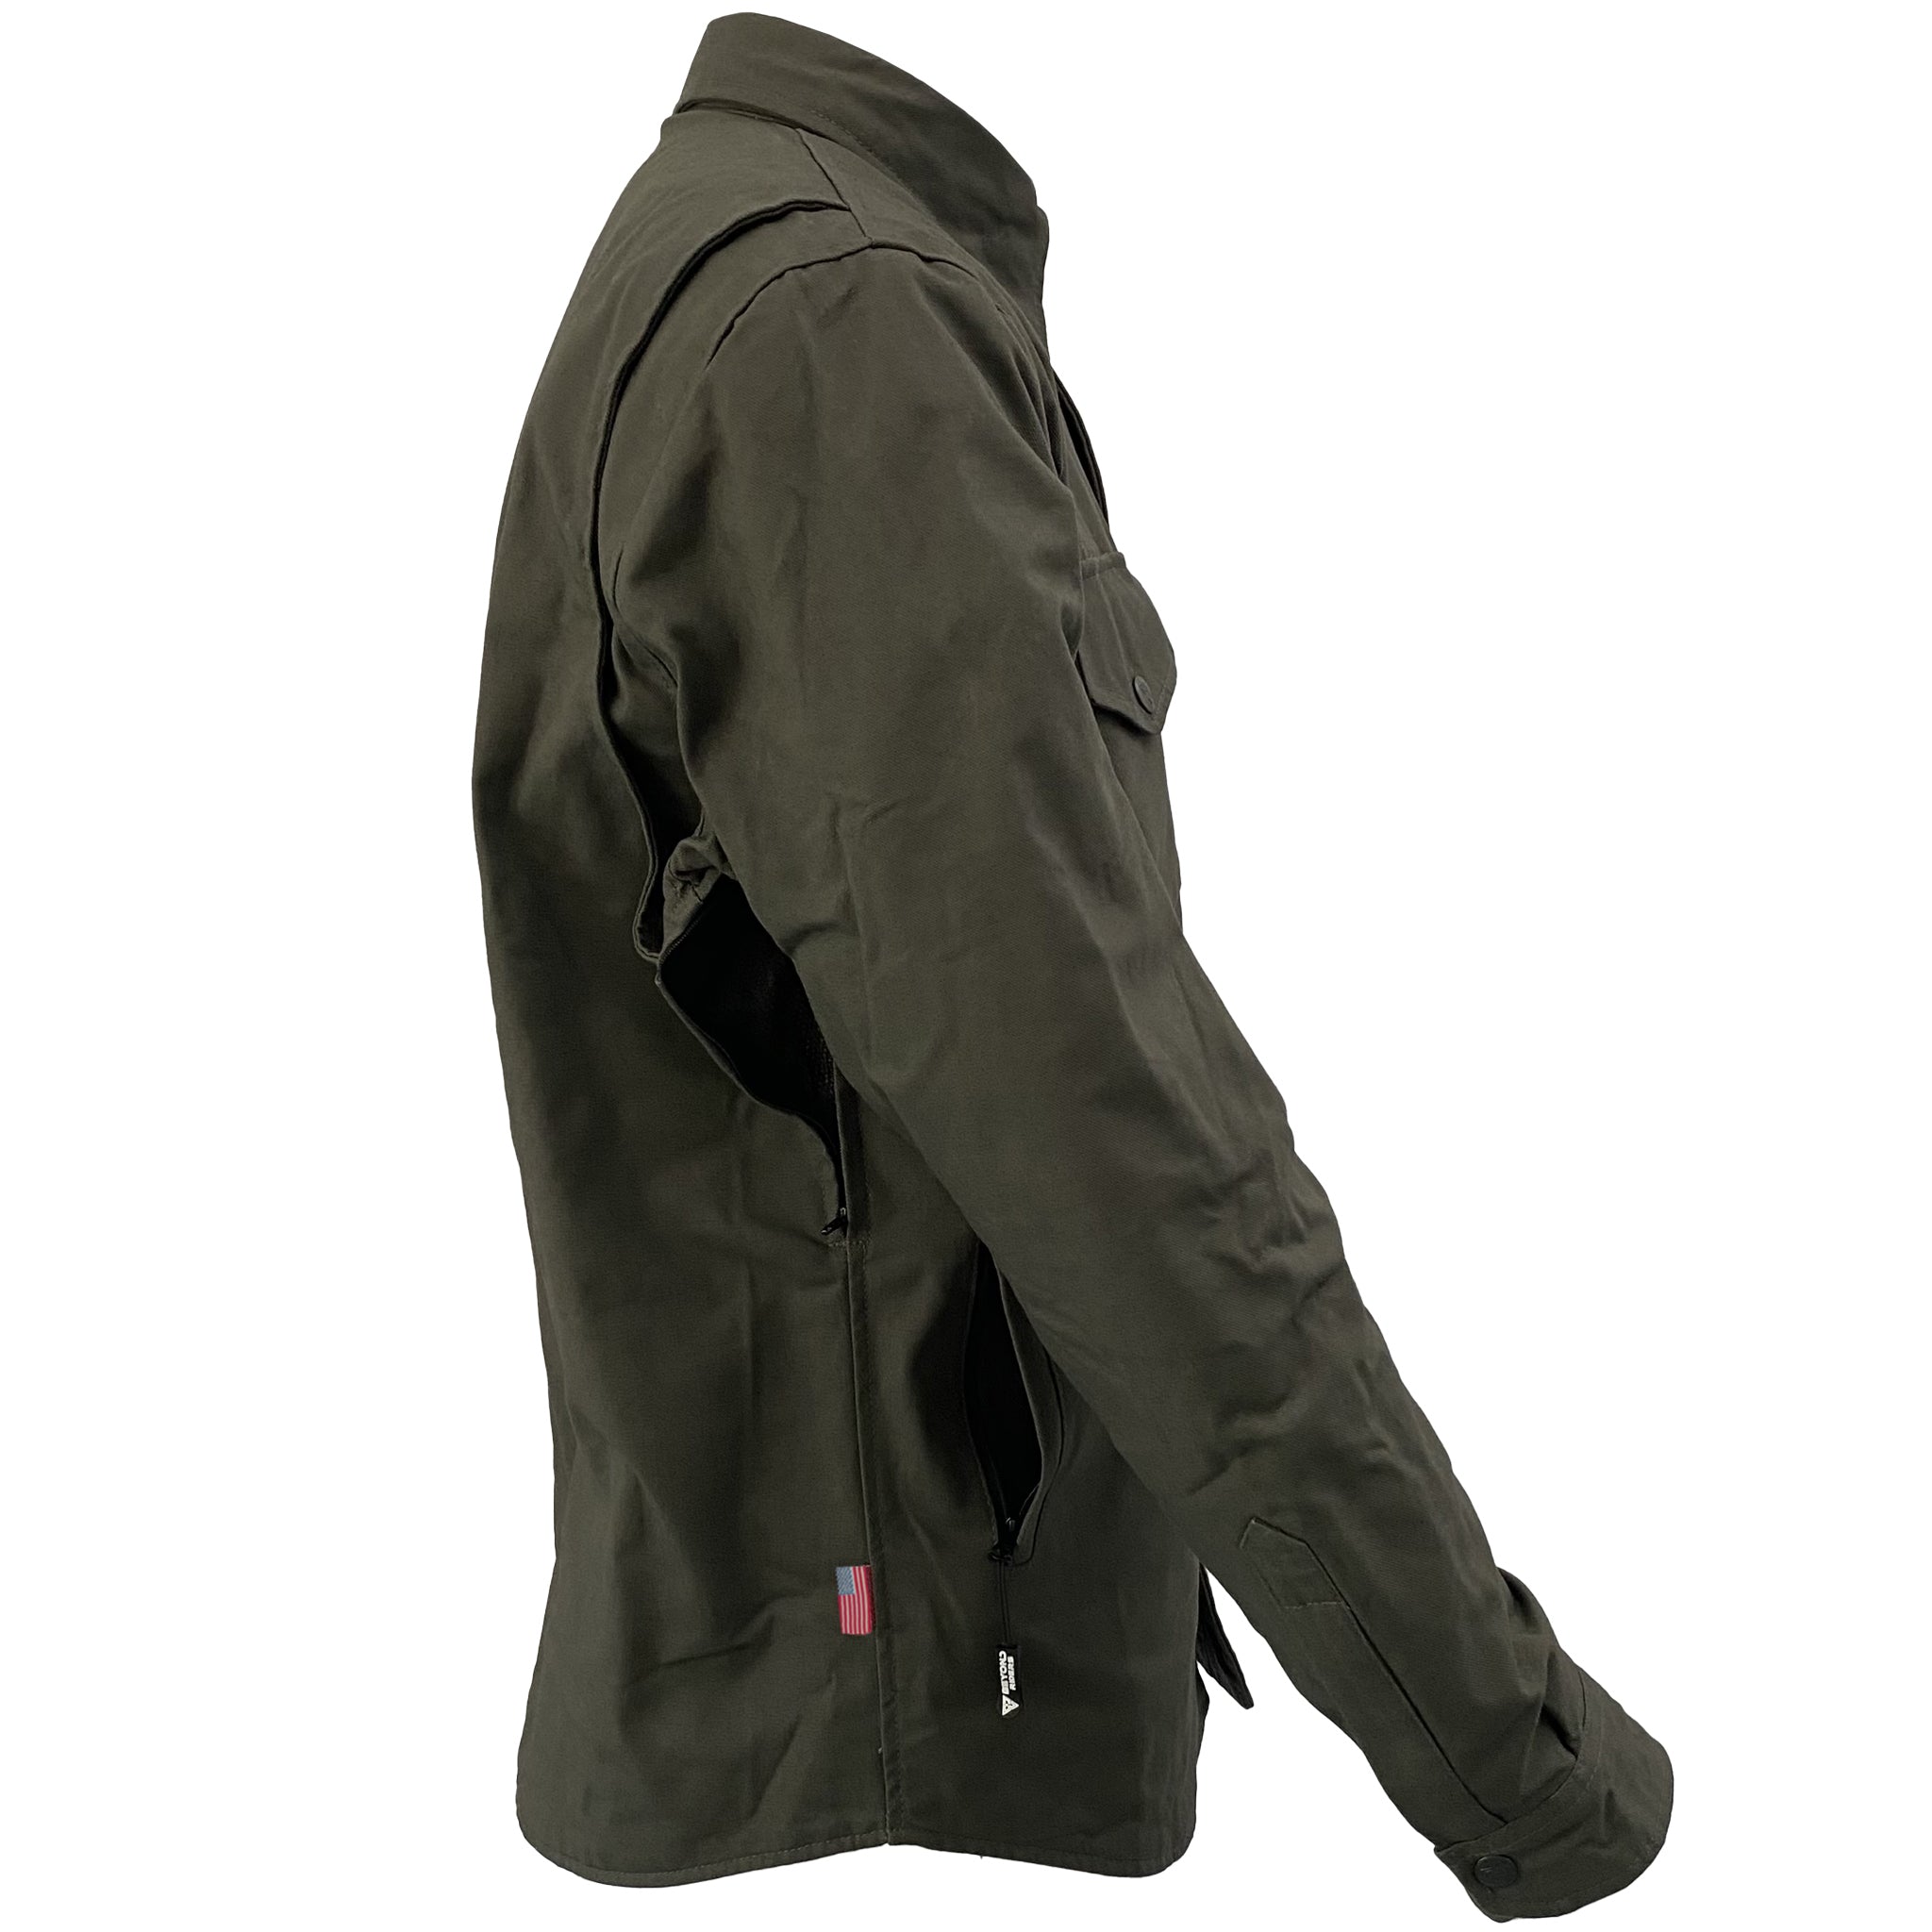 SALE Protective Canvas Jacket for Men - Army Green with Pads